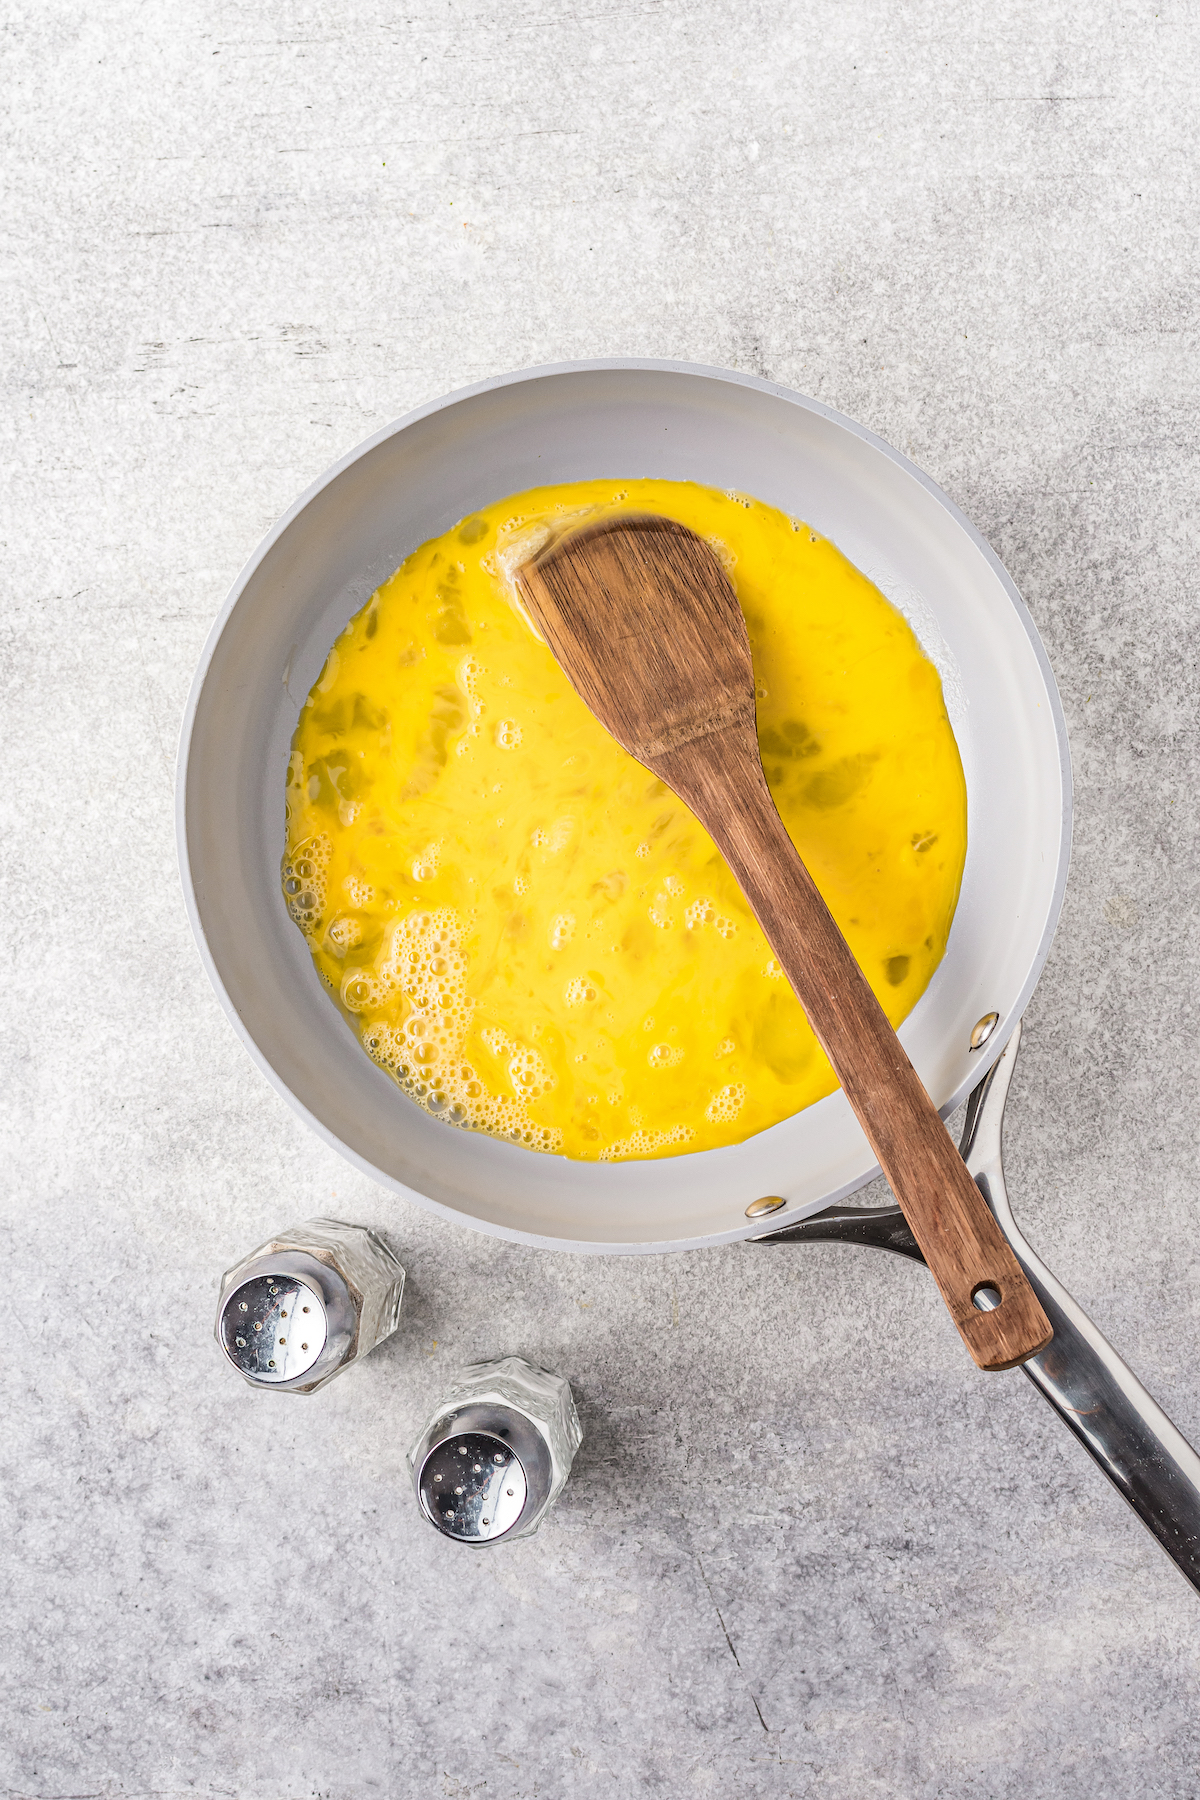 A wooden spatula is used to scramble eggs in a skillet as they cook.